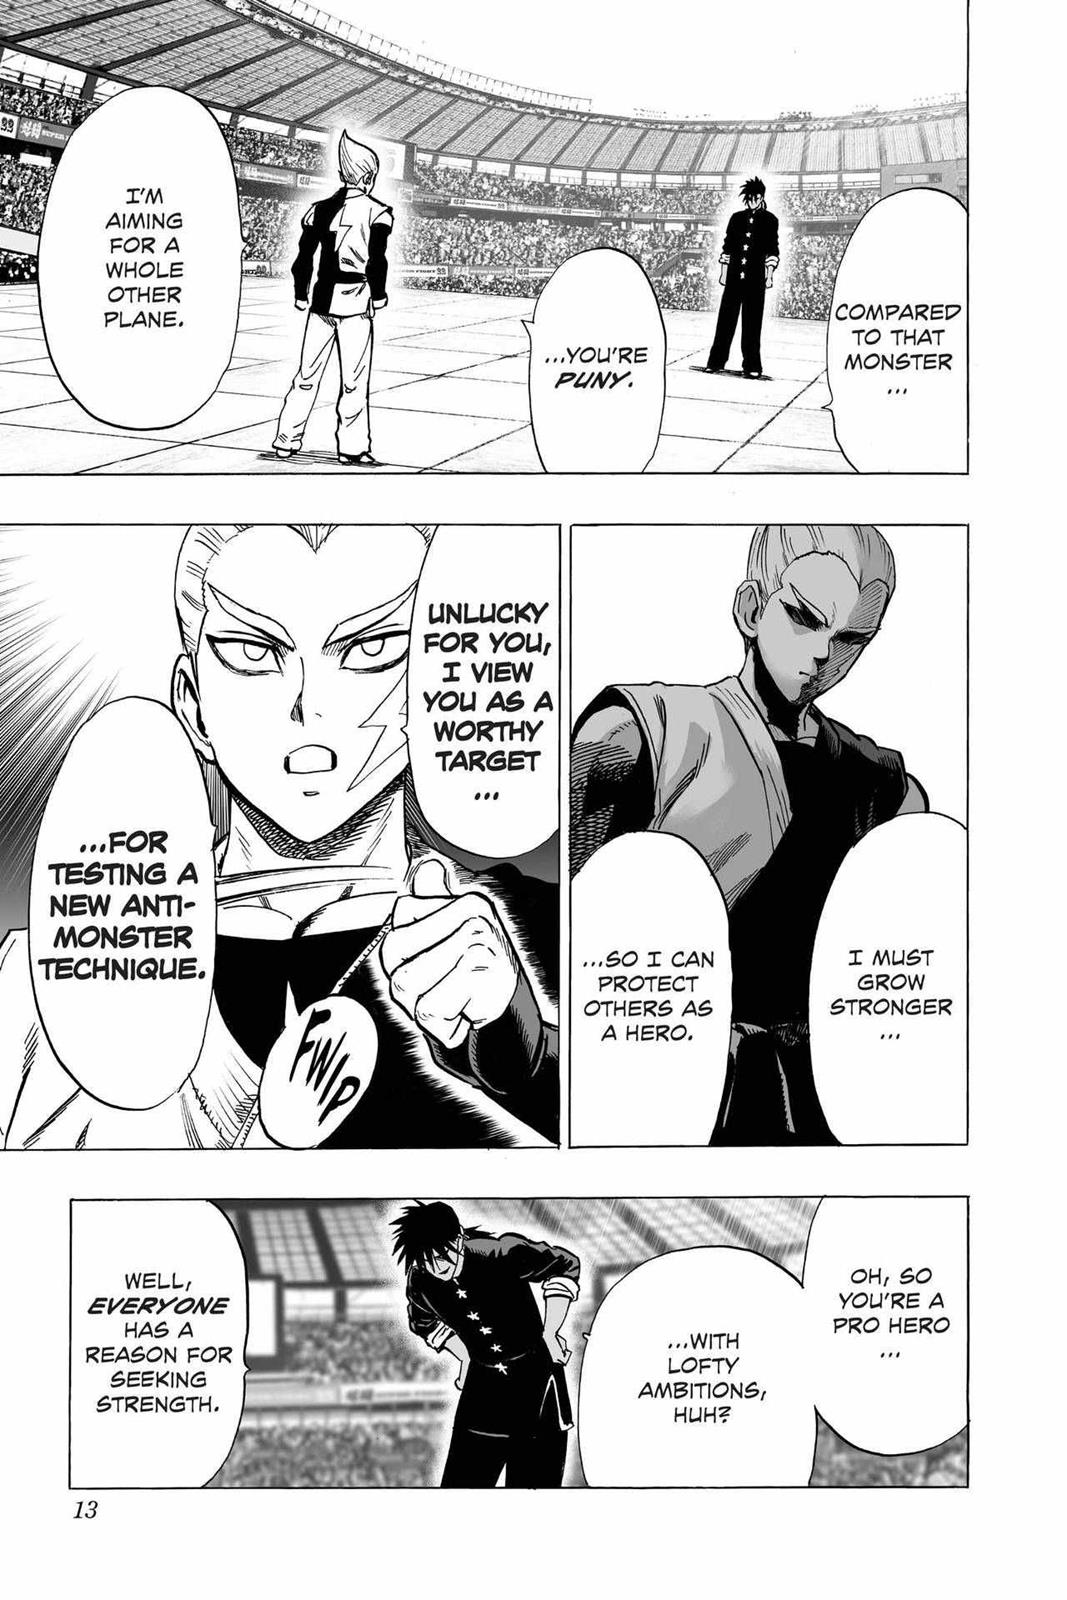 One-Punch Man, Punch 62 image 13